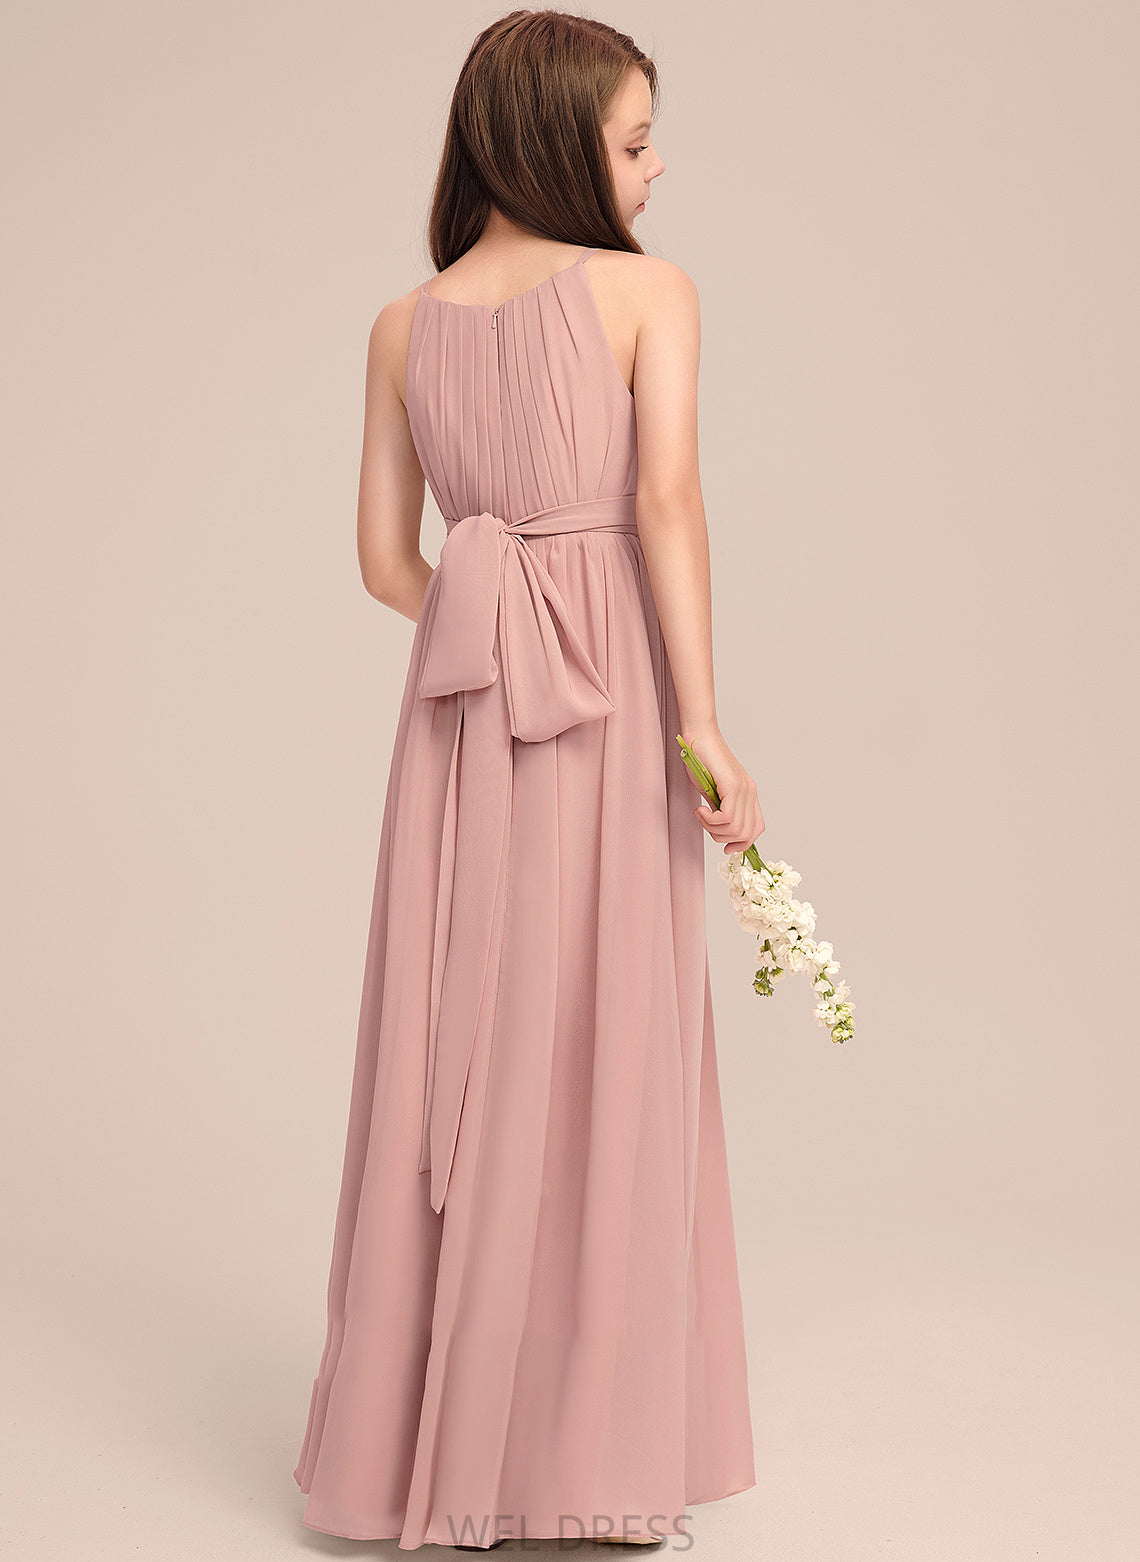 Junior Bridesmaid Dresses Bow(s) Neck A-Line Lacey Floor-Length With Chiffon Scoop Ruffle